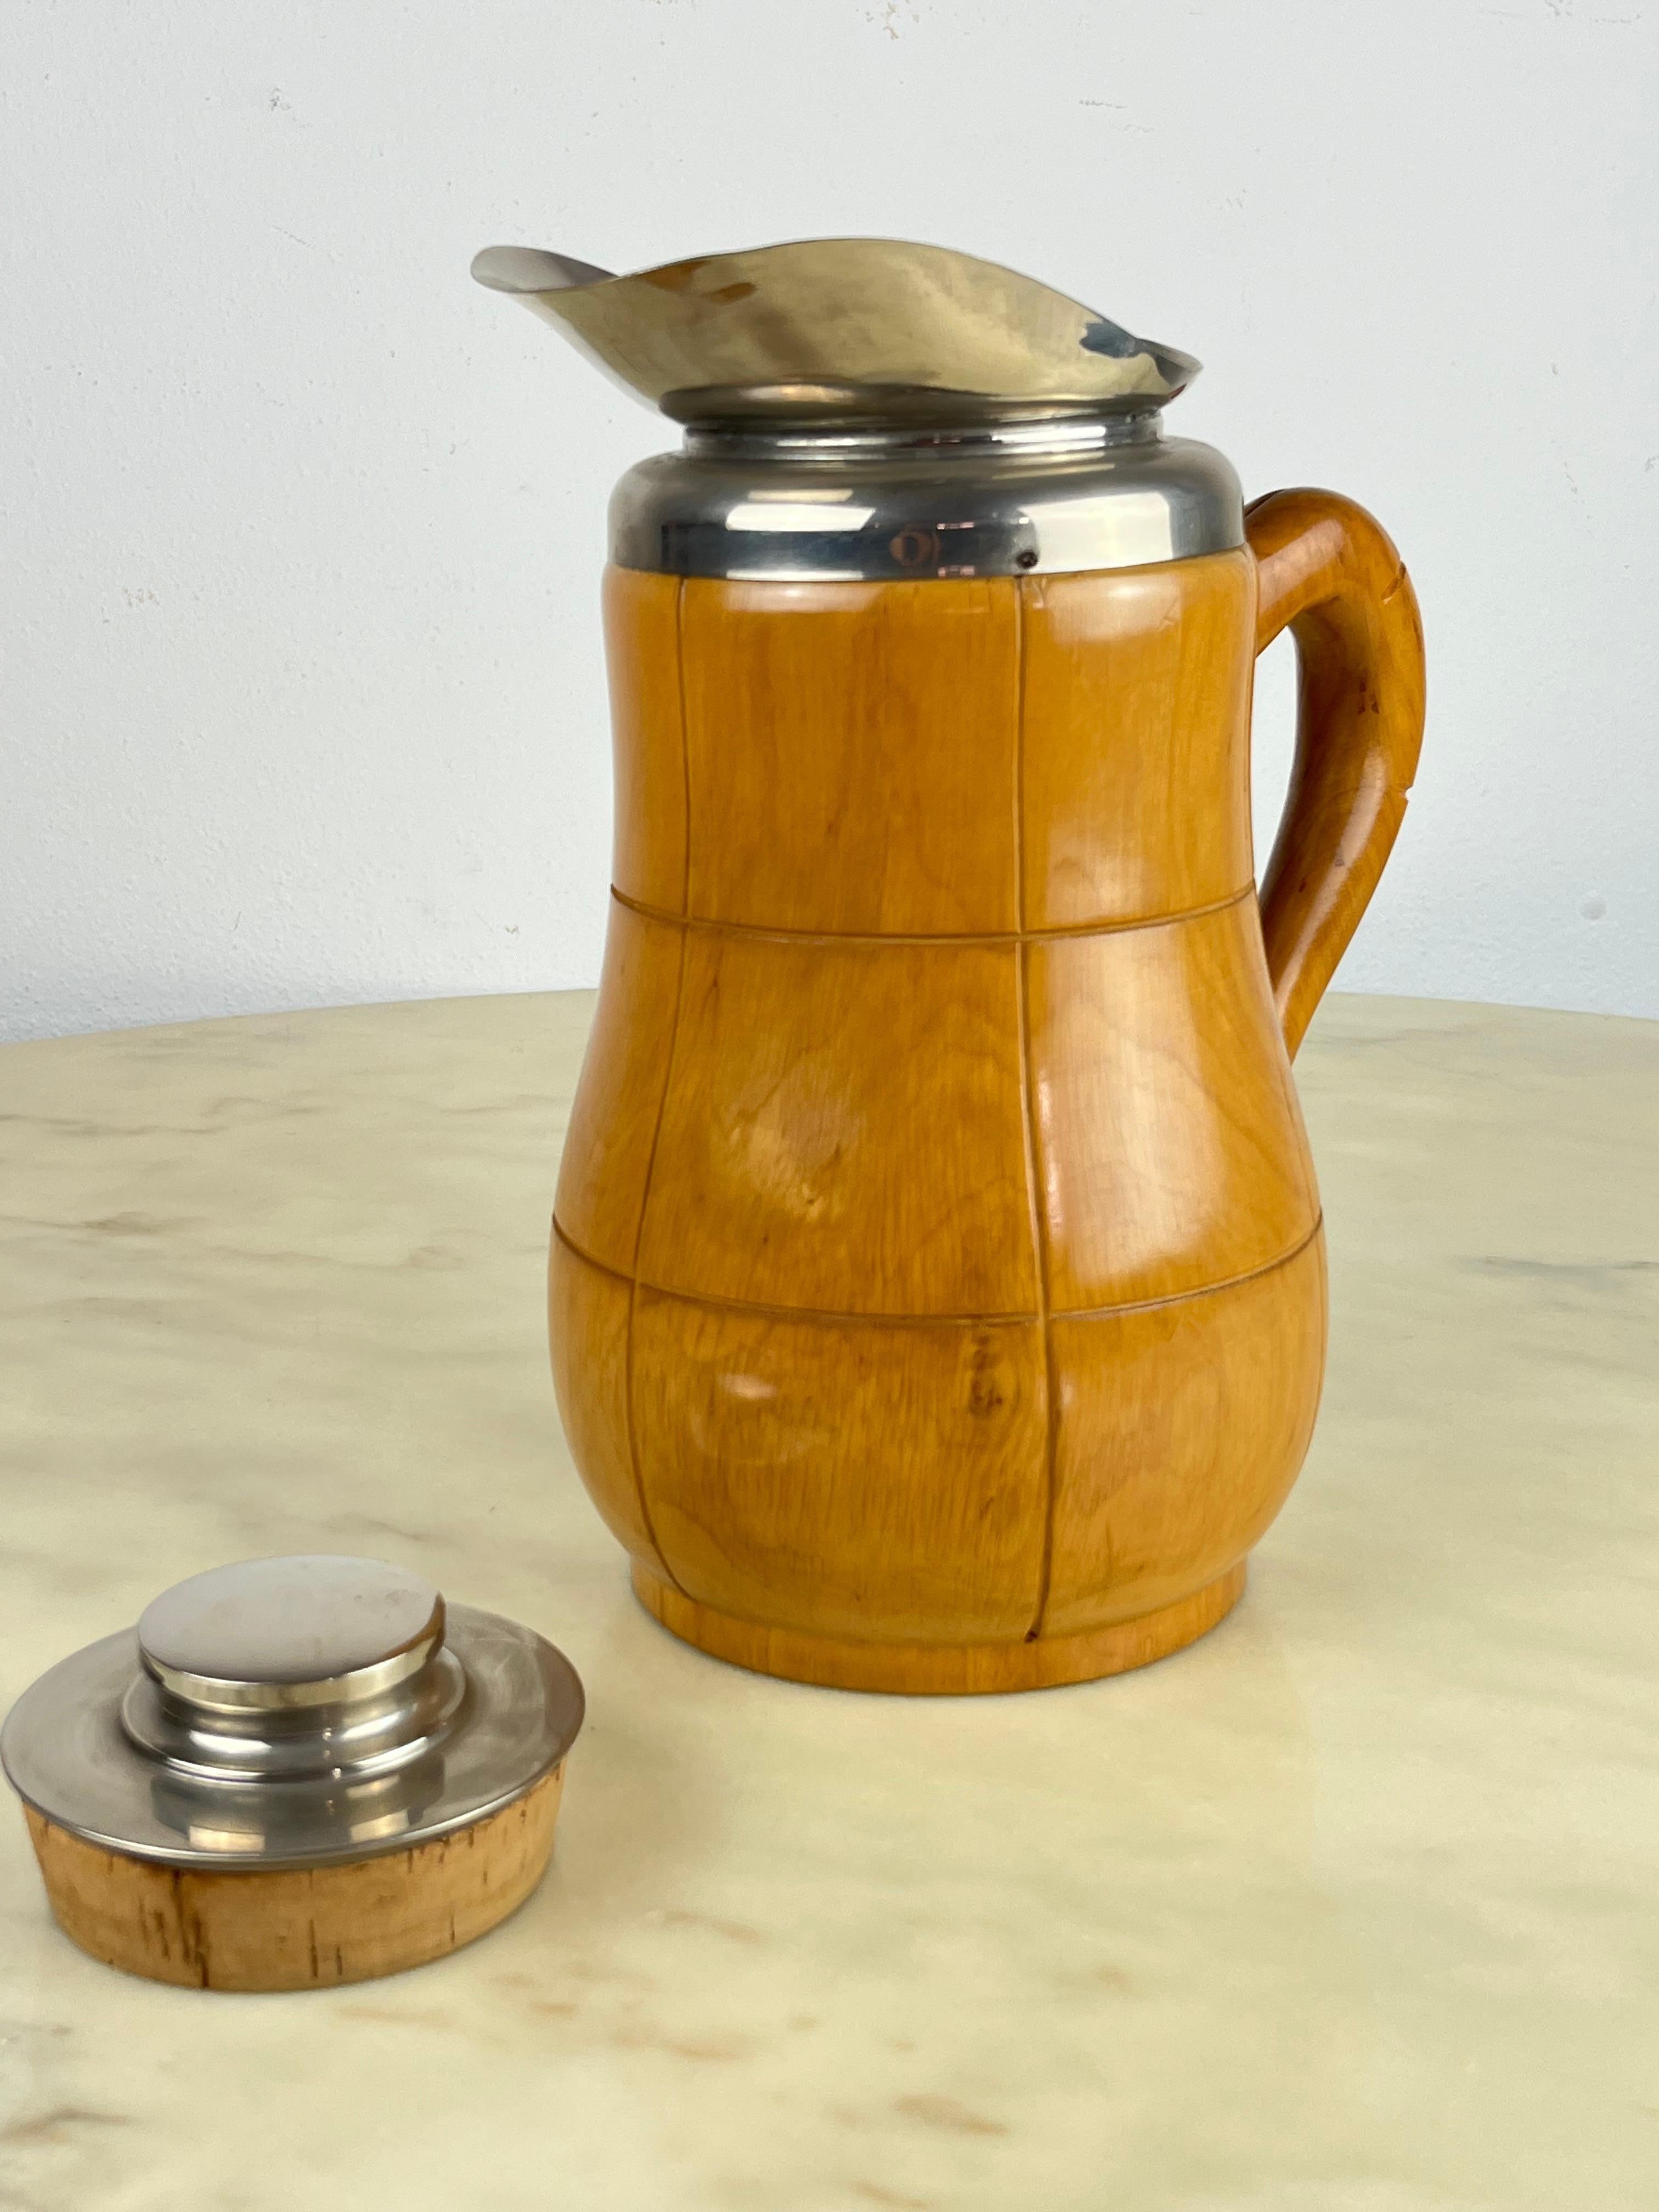 Aldo Tura for Macabo Milano Italia Thermos Decanter in walnut wood, 1950s
It belonged to my great-grandparents, it is intact and in good condition.Commissioned by Macabo Italia of Cusano in Milan to the well-known designer Aldo Tura.